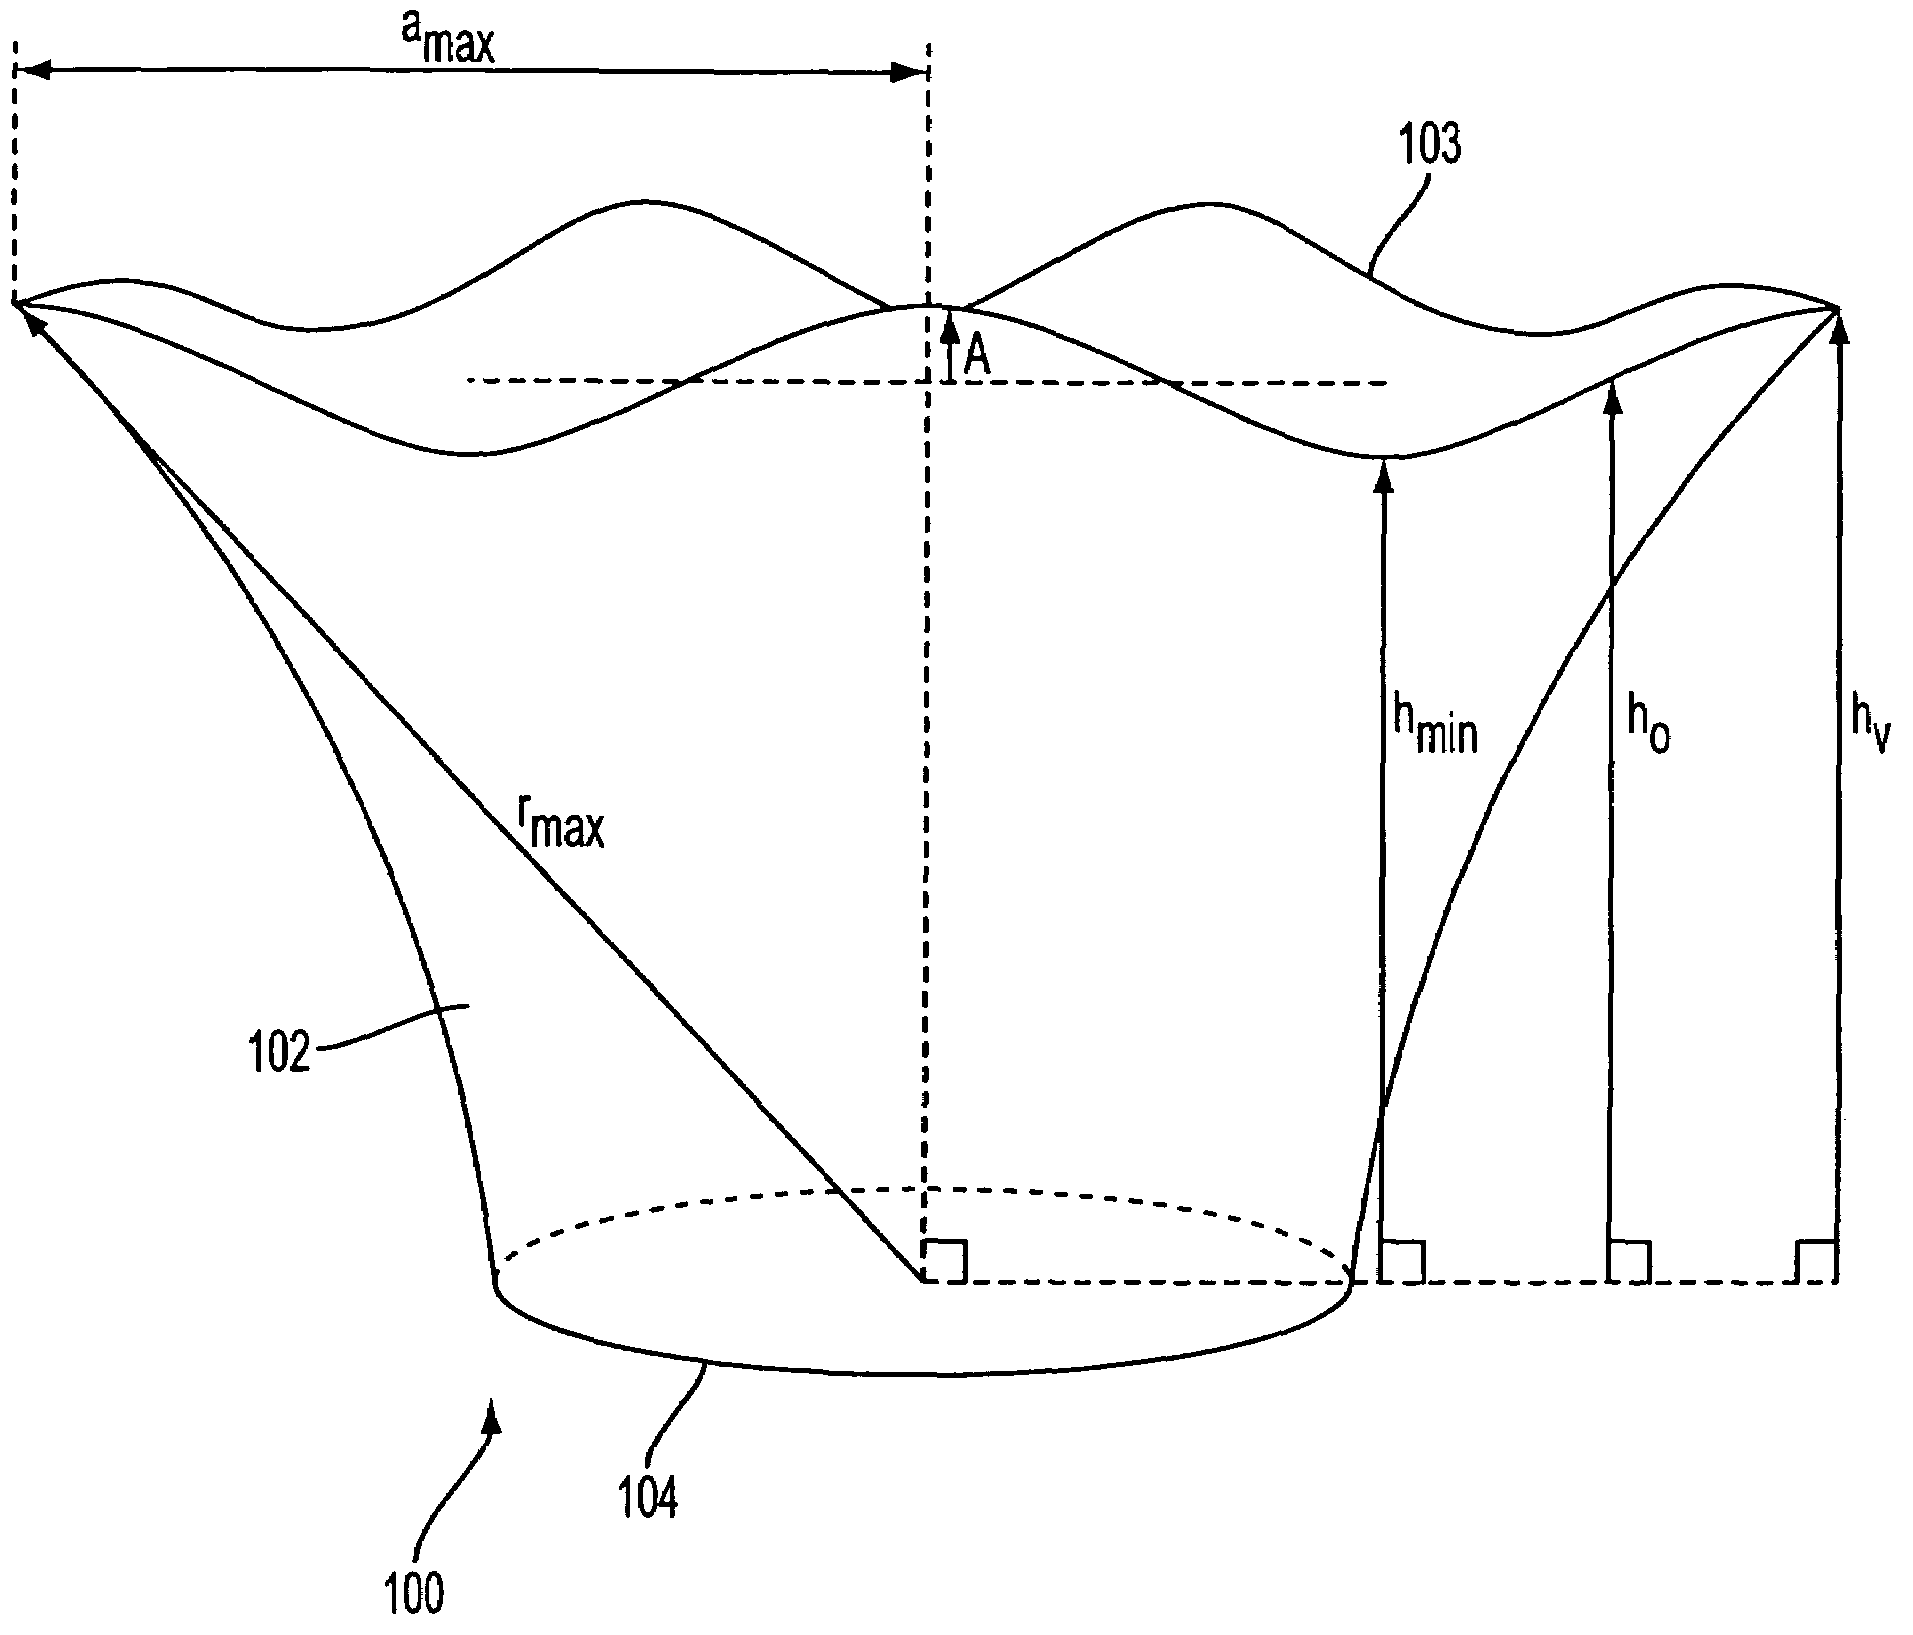 Whizzer cone for loudspeaker for producing uniform frequency response